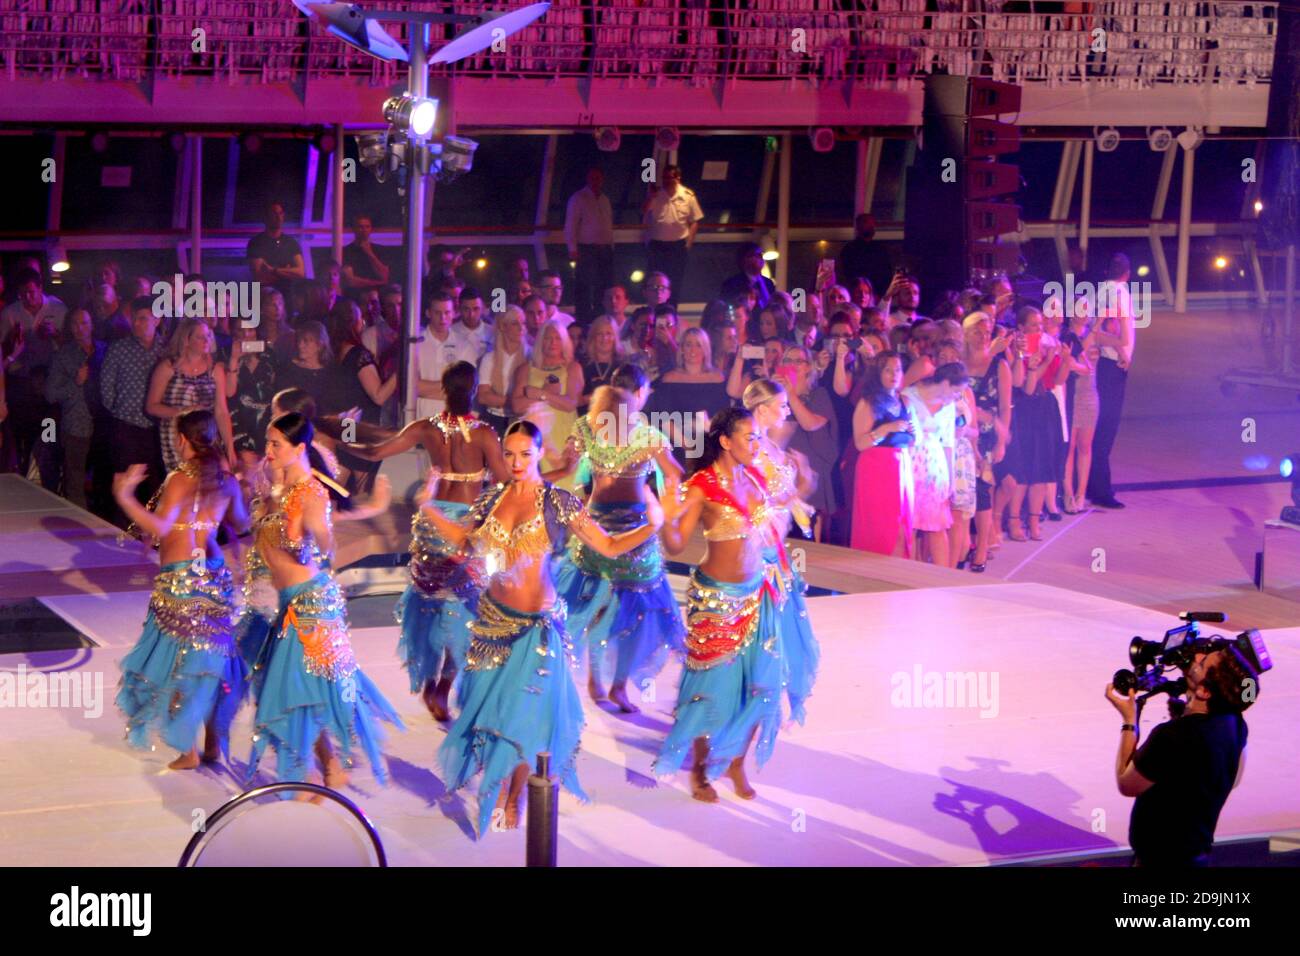 Dance performance onboard a cruise ship Stock Photo